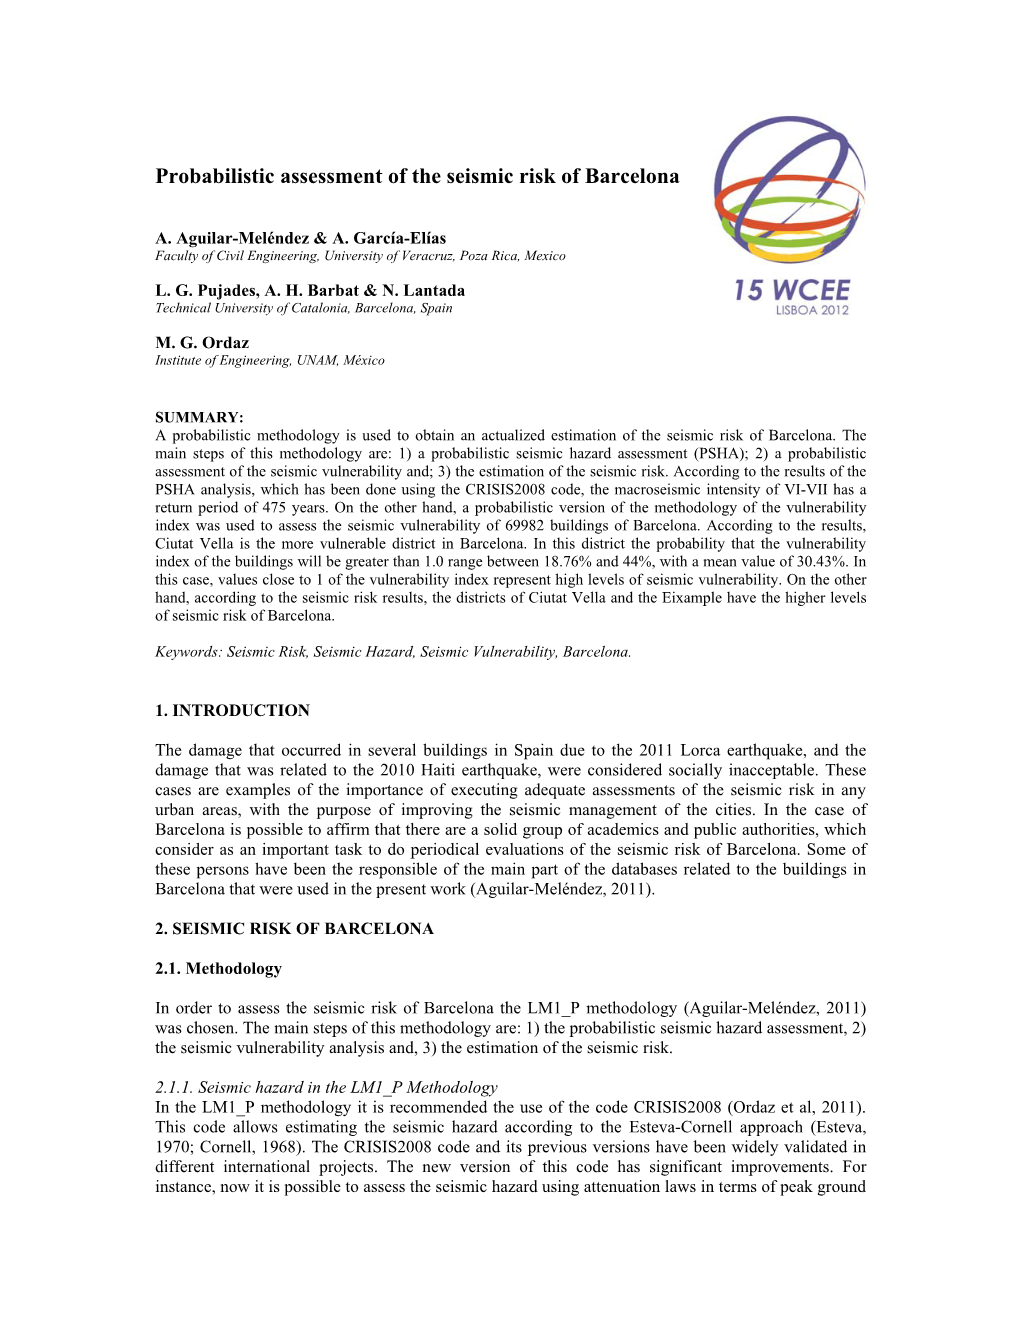 Probabilistic Assessment of the Seismic Risk of Barcelona